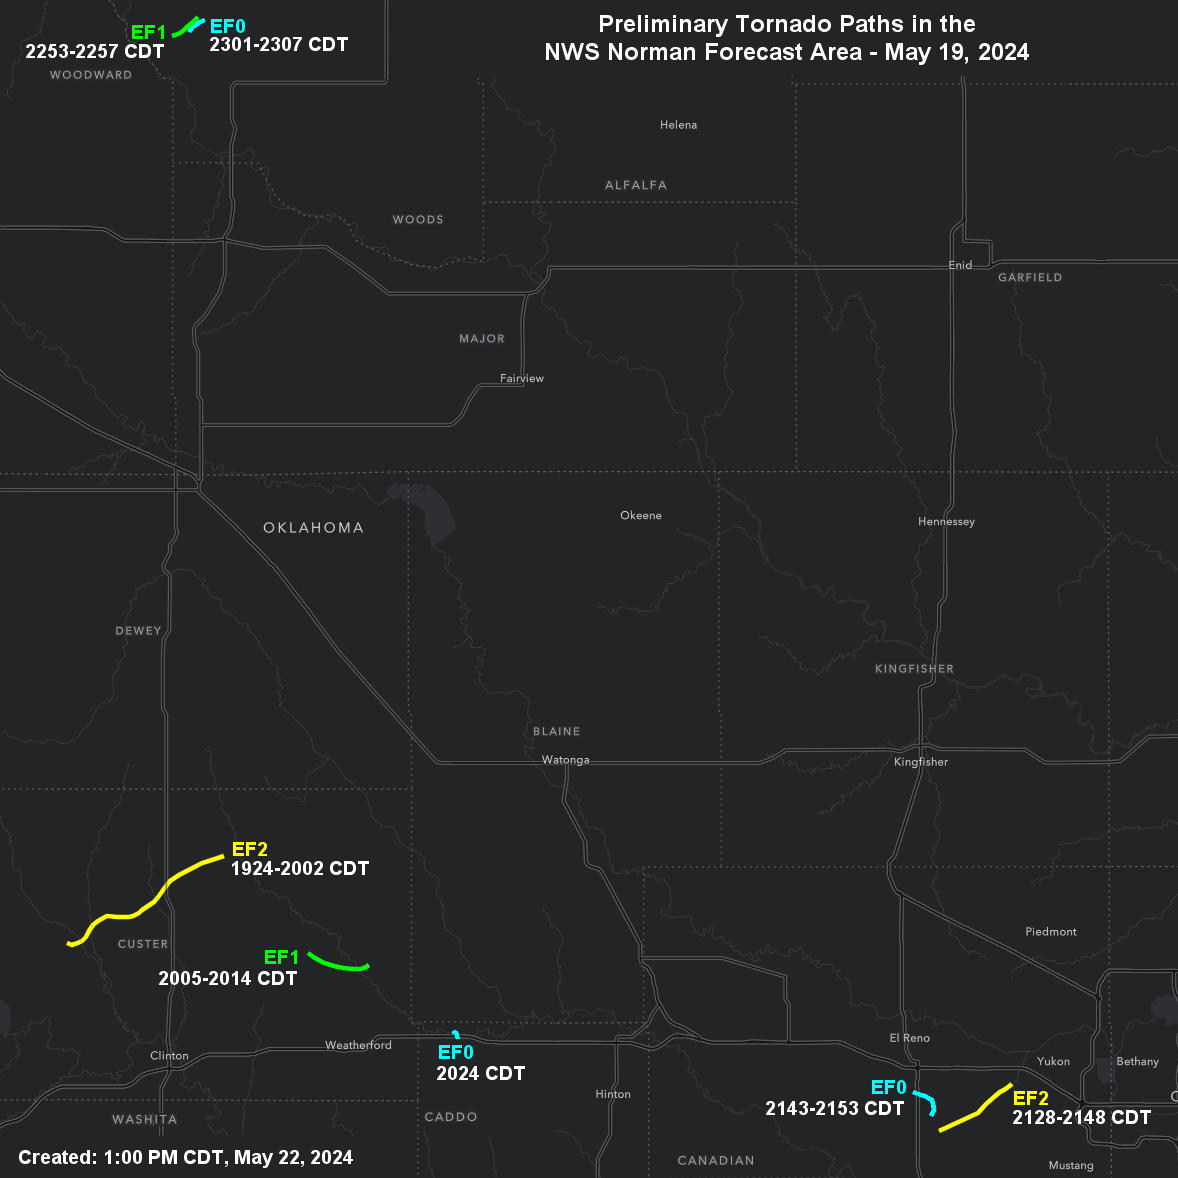 Preliminary Tornado Damage Paths in the NWS Norman Forecast Area for the May 19, 2024 Severe Weather Event